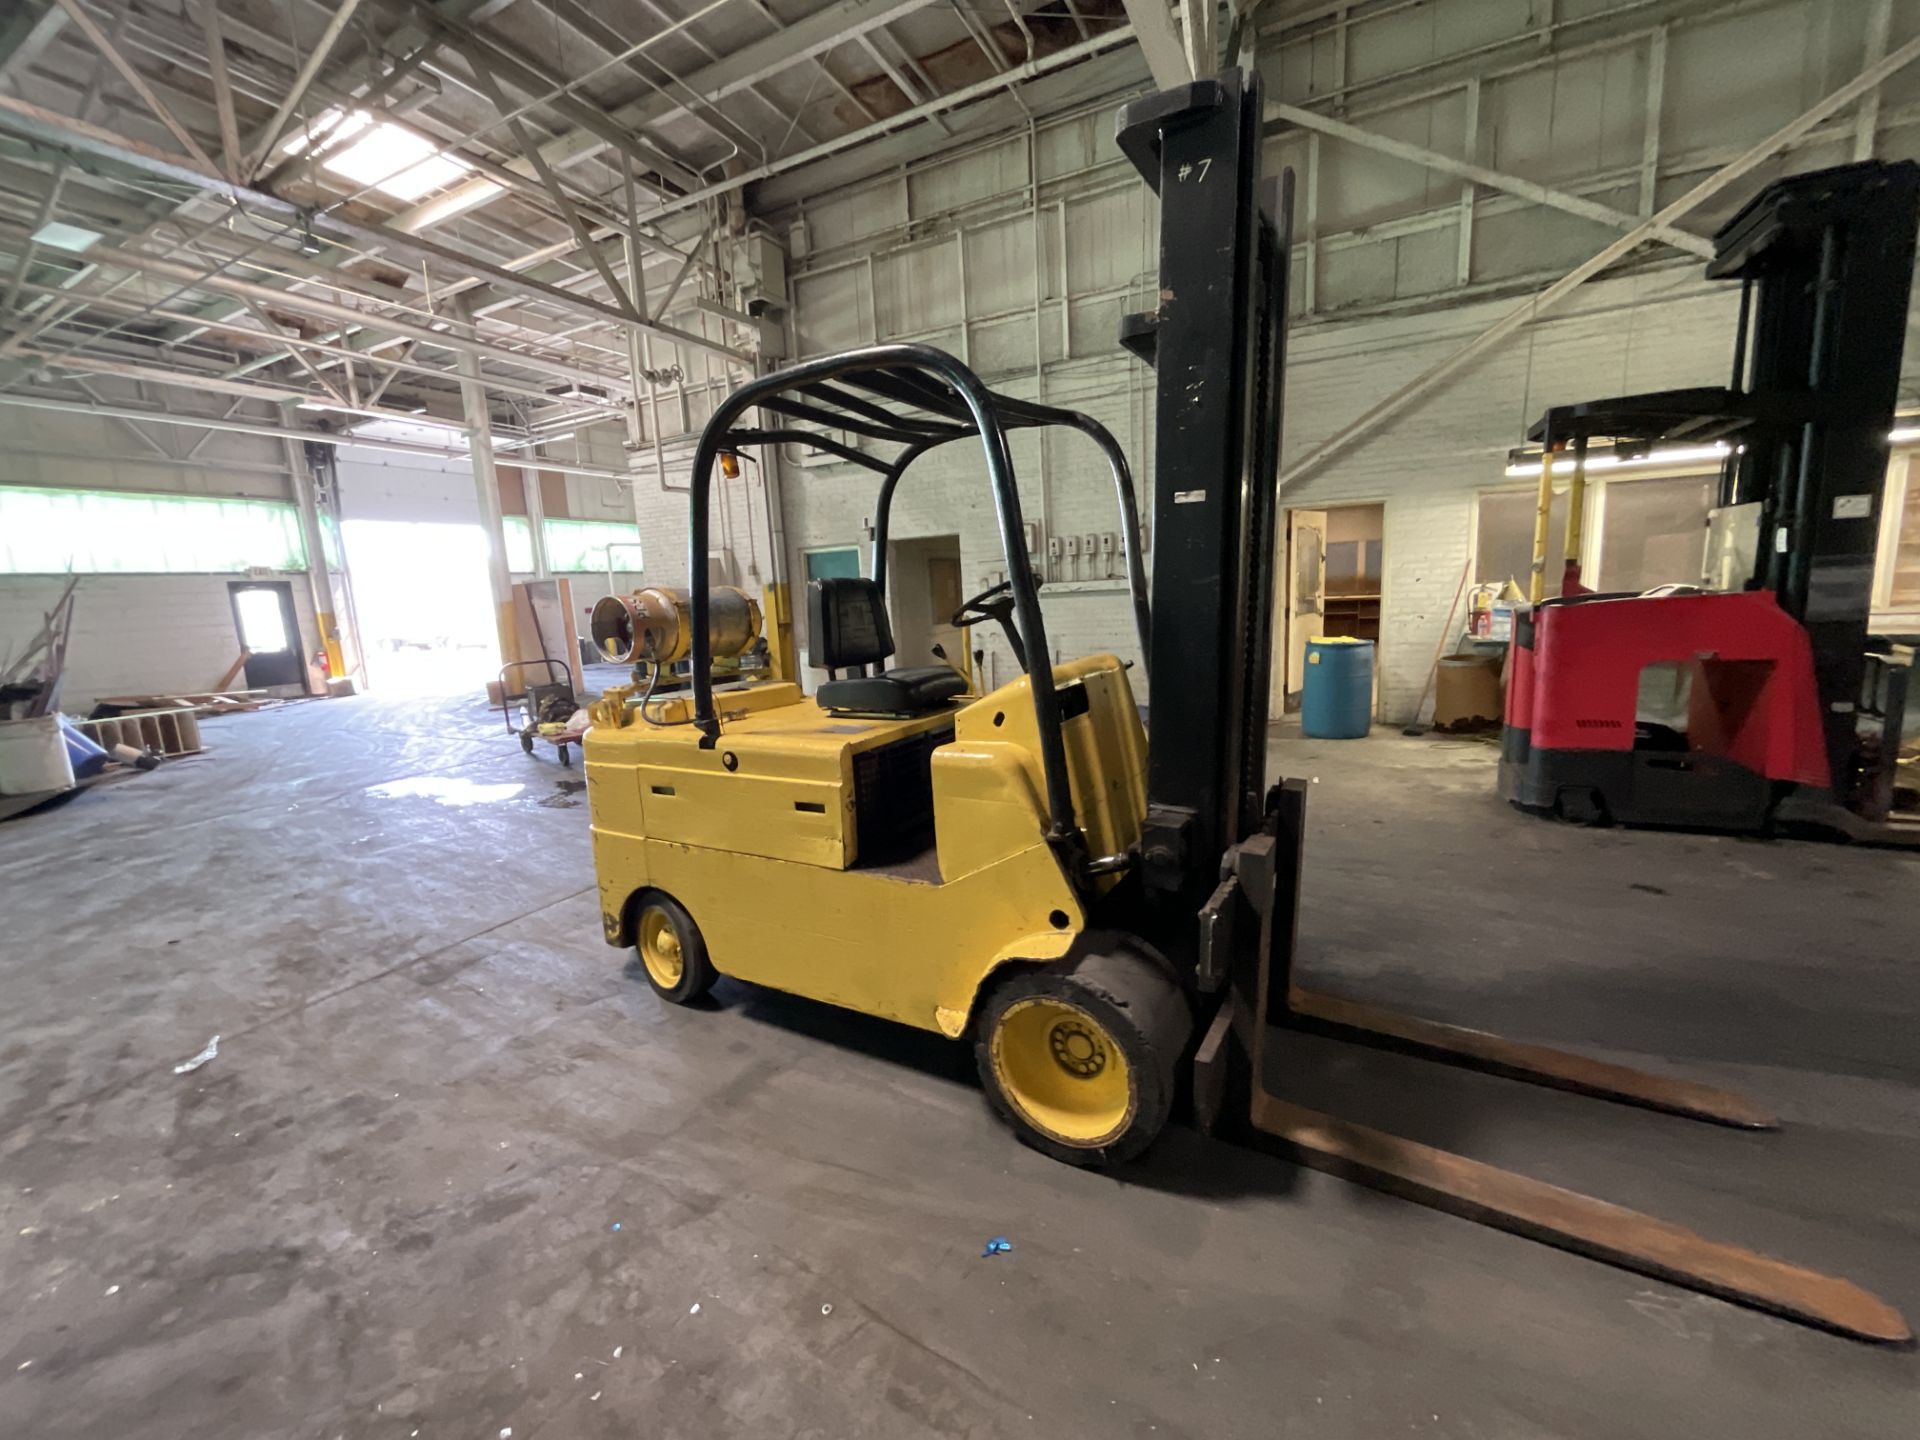 Caterpillar Forklift 12,000 lift , weight 15,090 model T120c 107” height 4 ft forks LP gas - Image 7 of 14